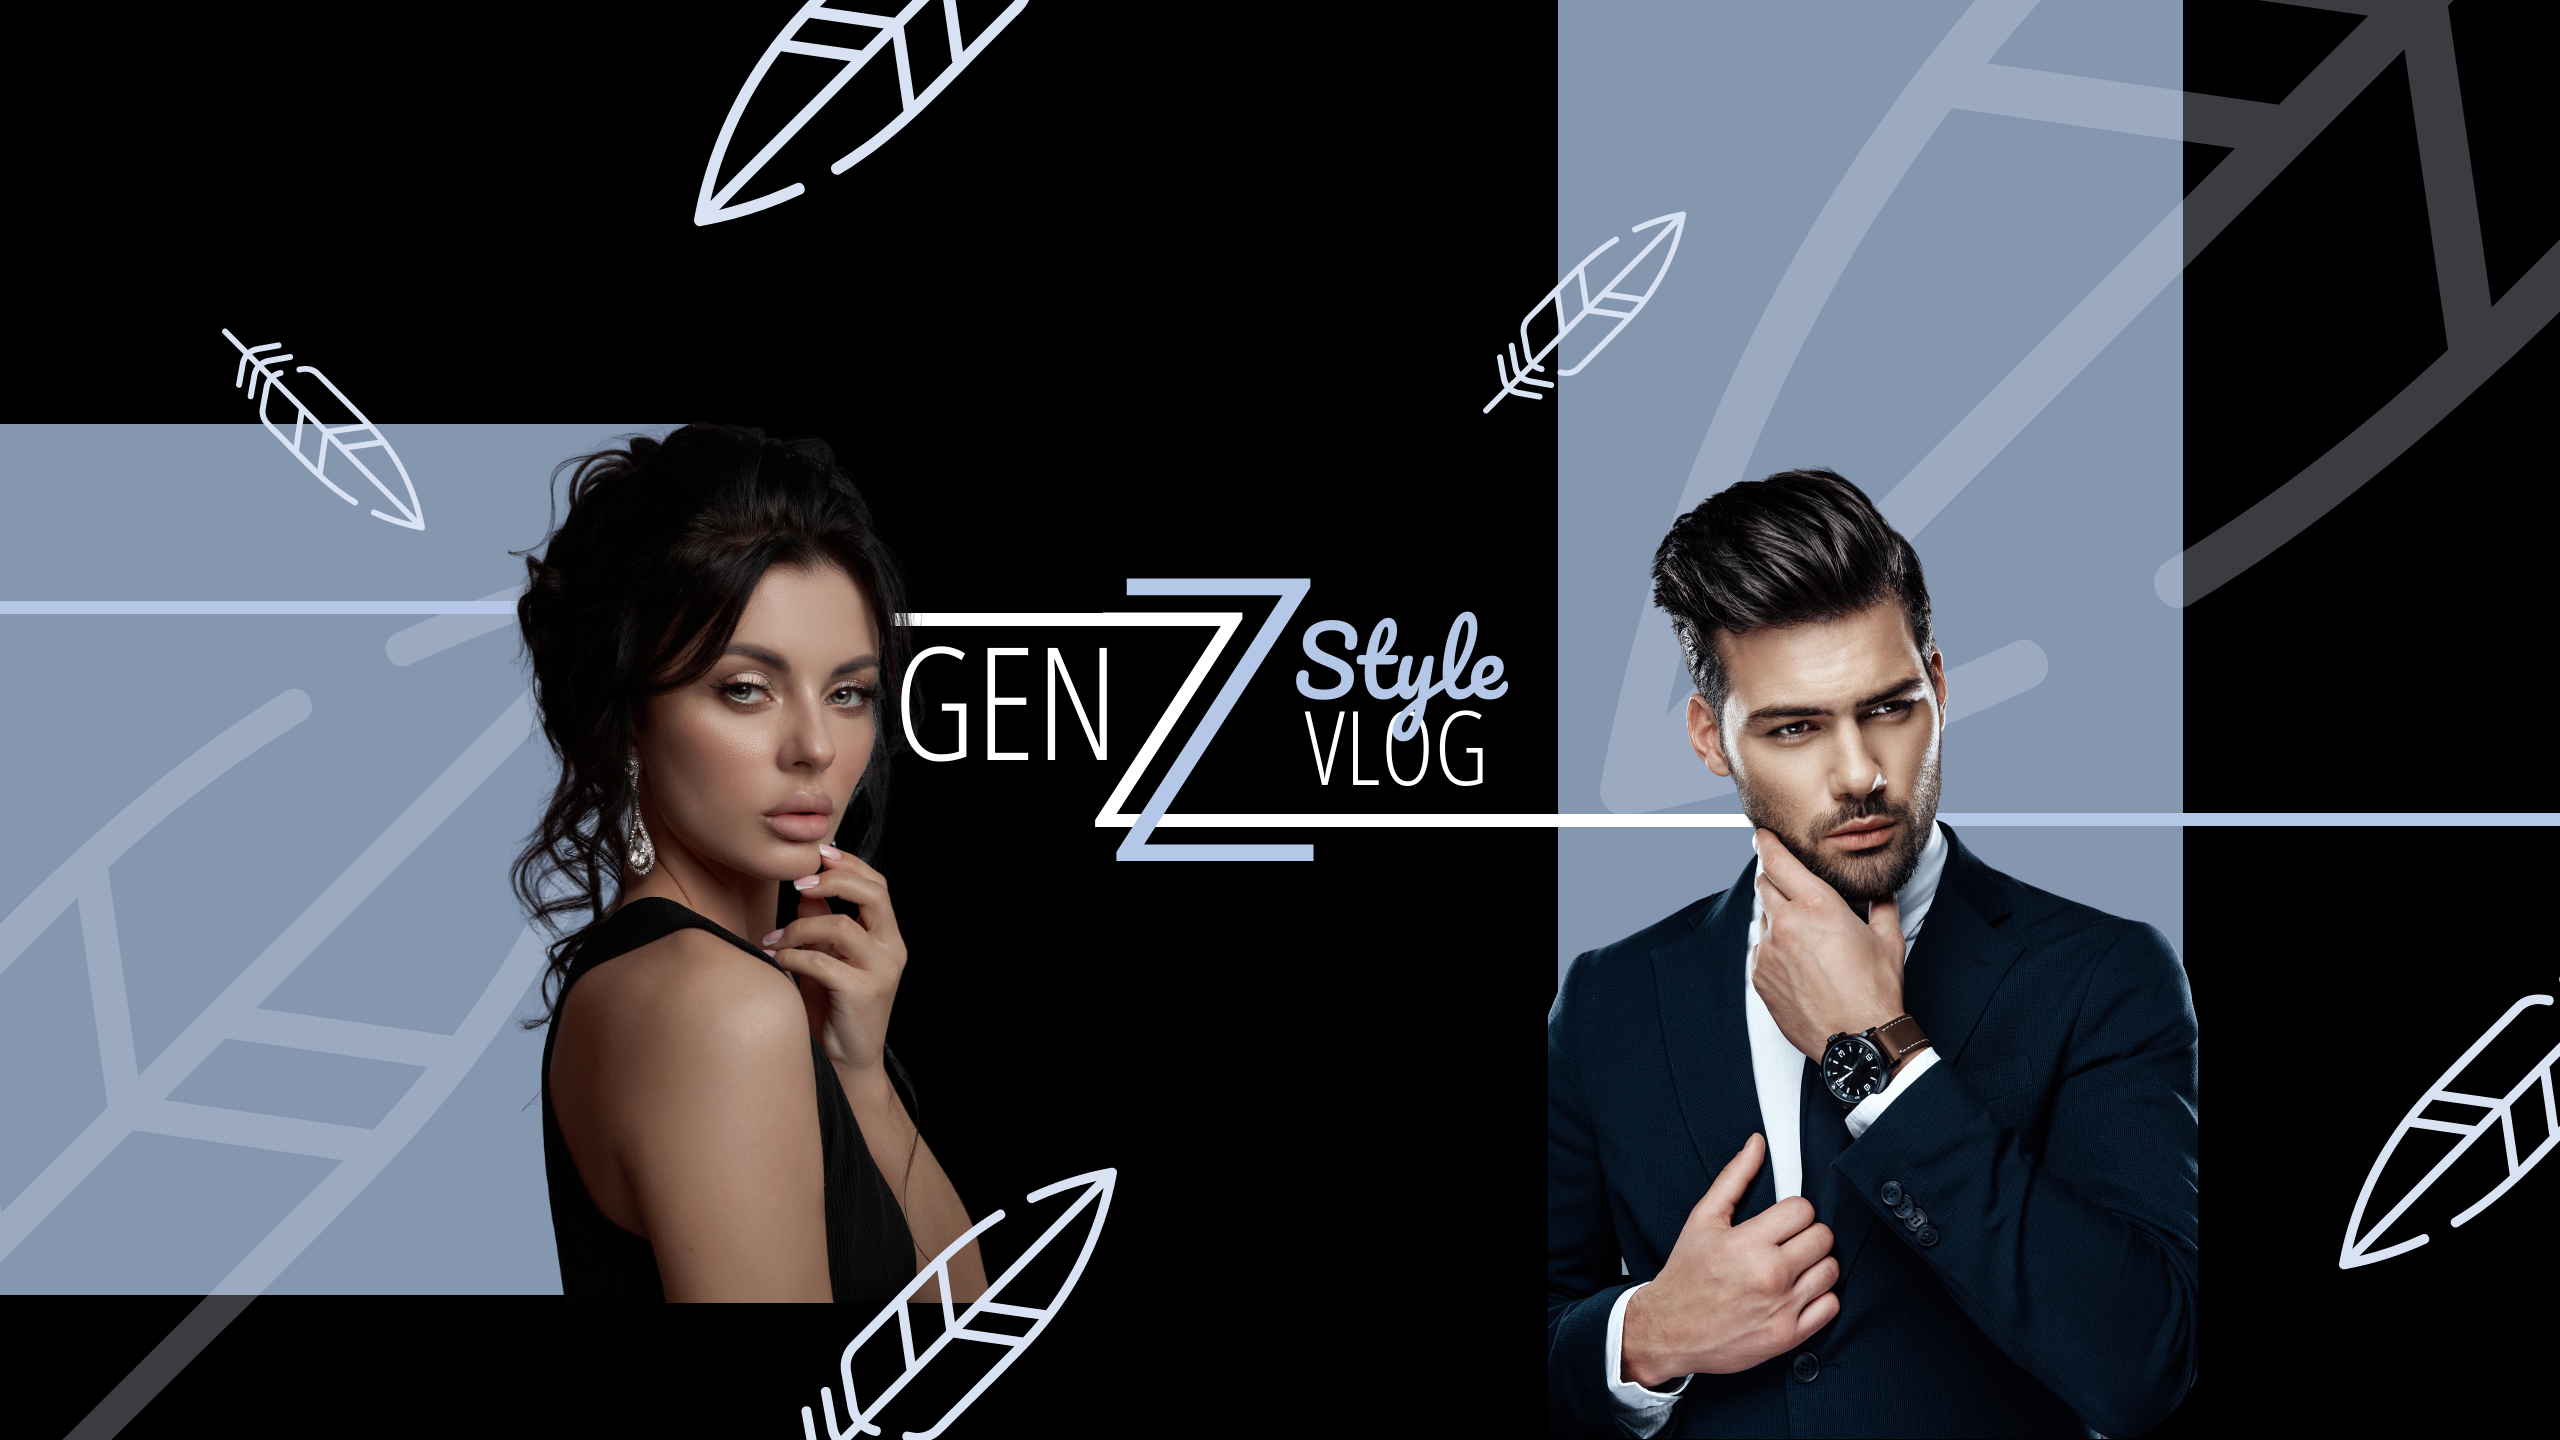 Fashion YouTube Banner Template